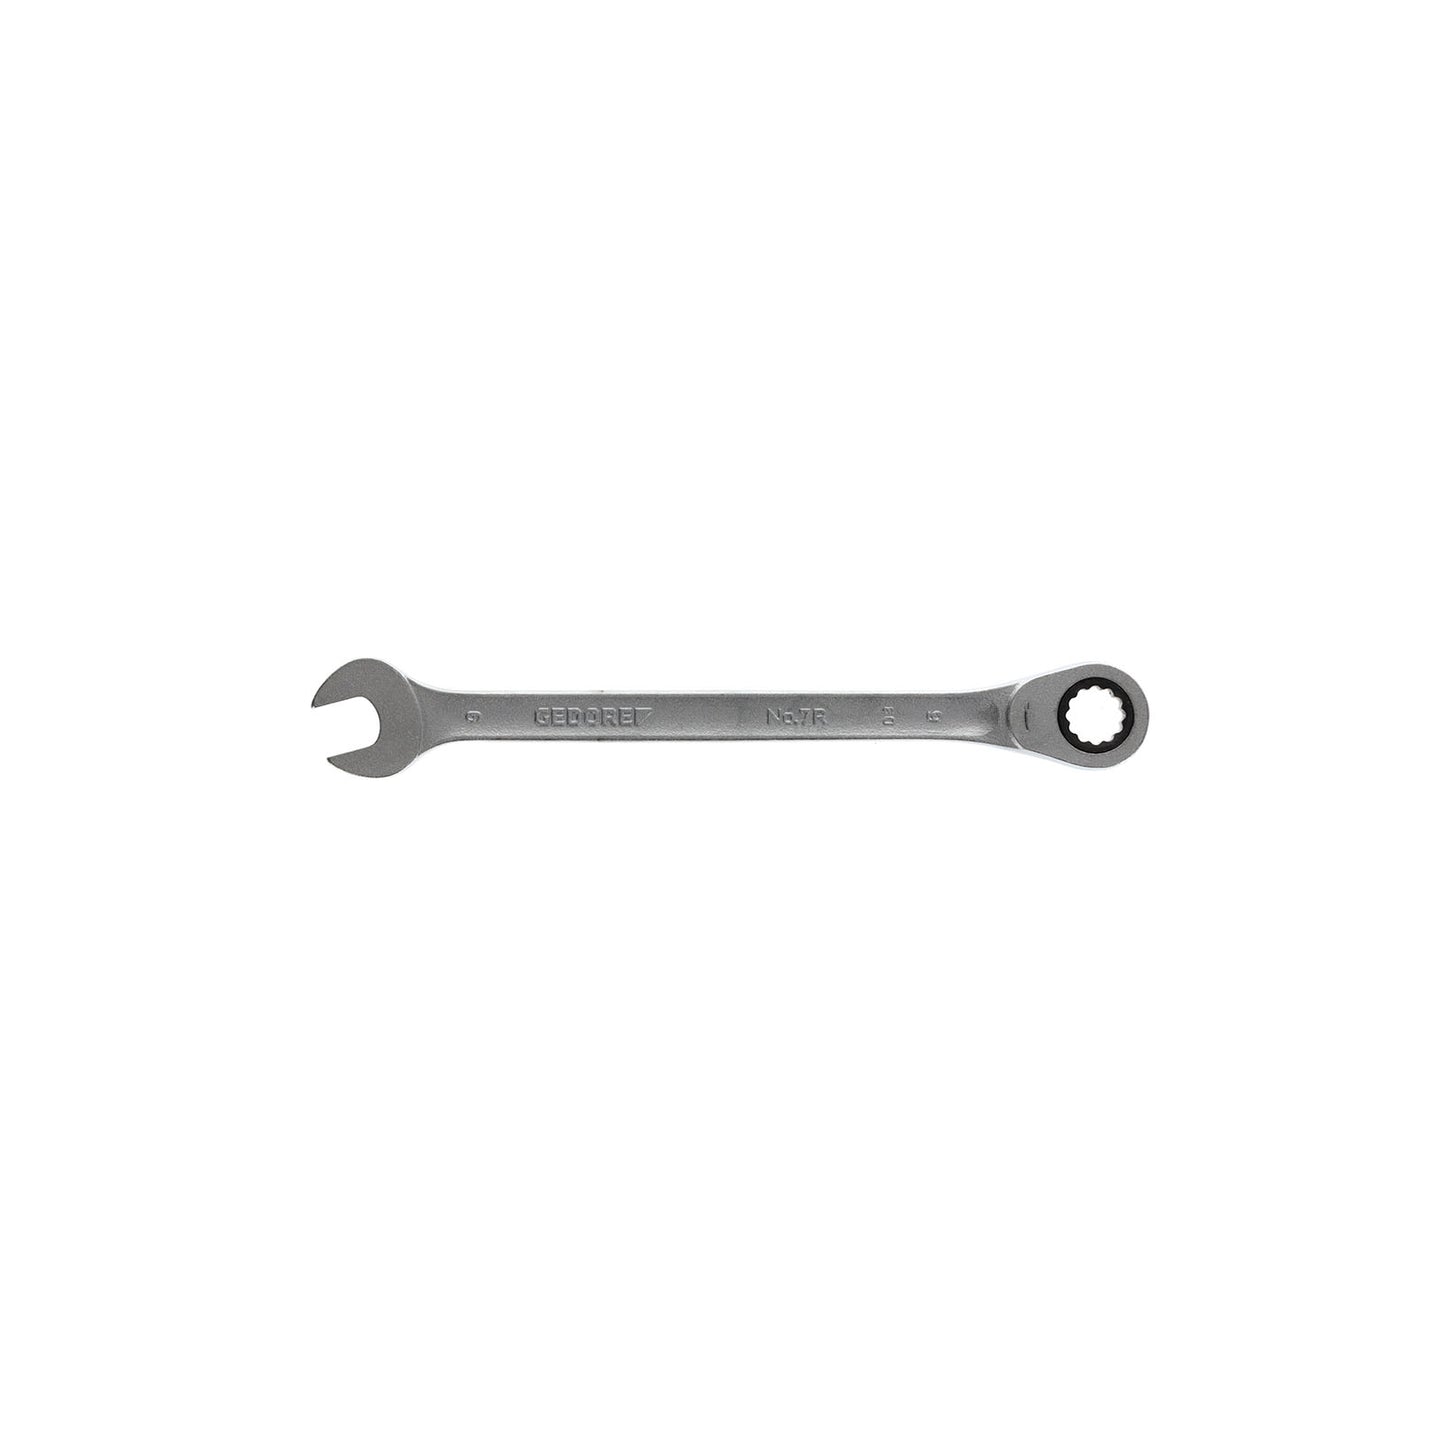 GEDORE 7 R 9 - Ratchet combination wrench, 9mm (2297078)